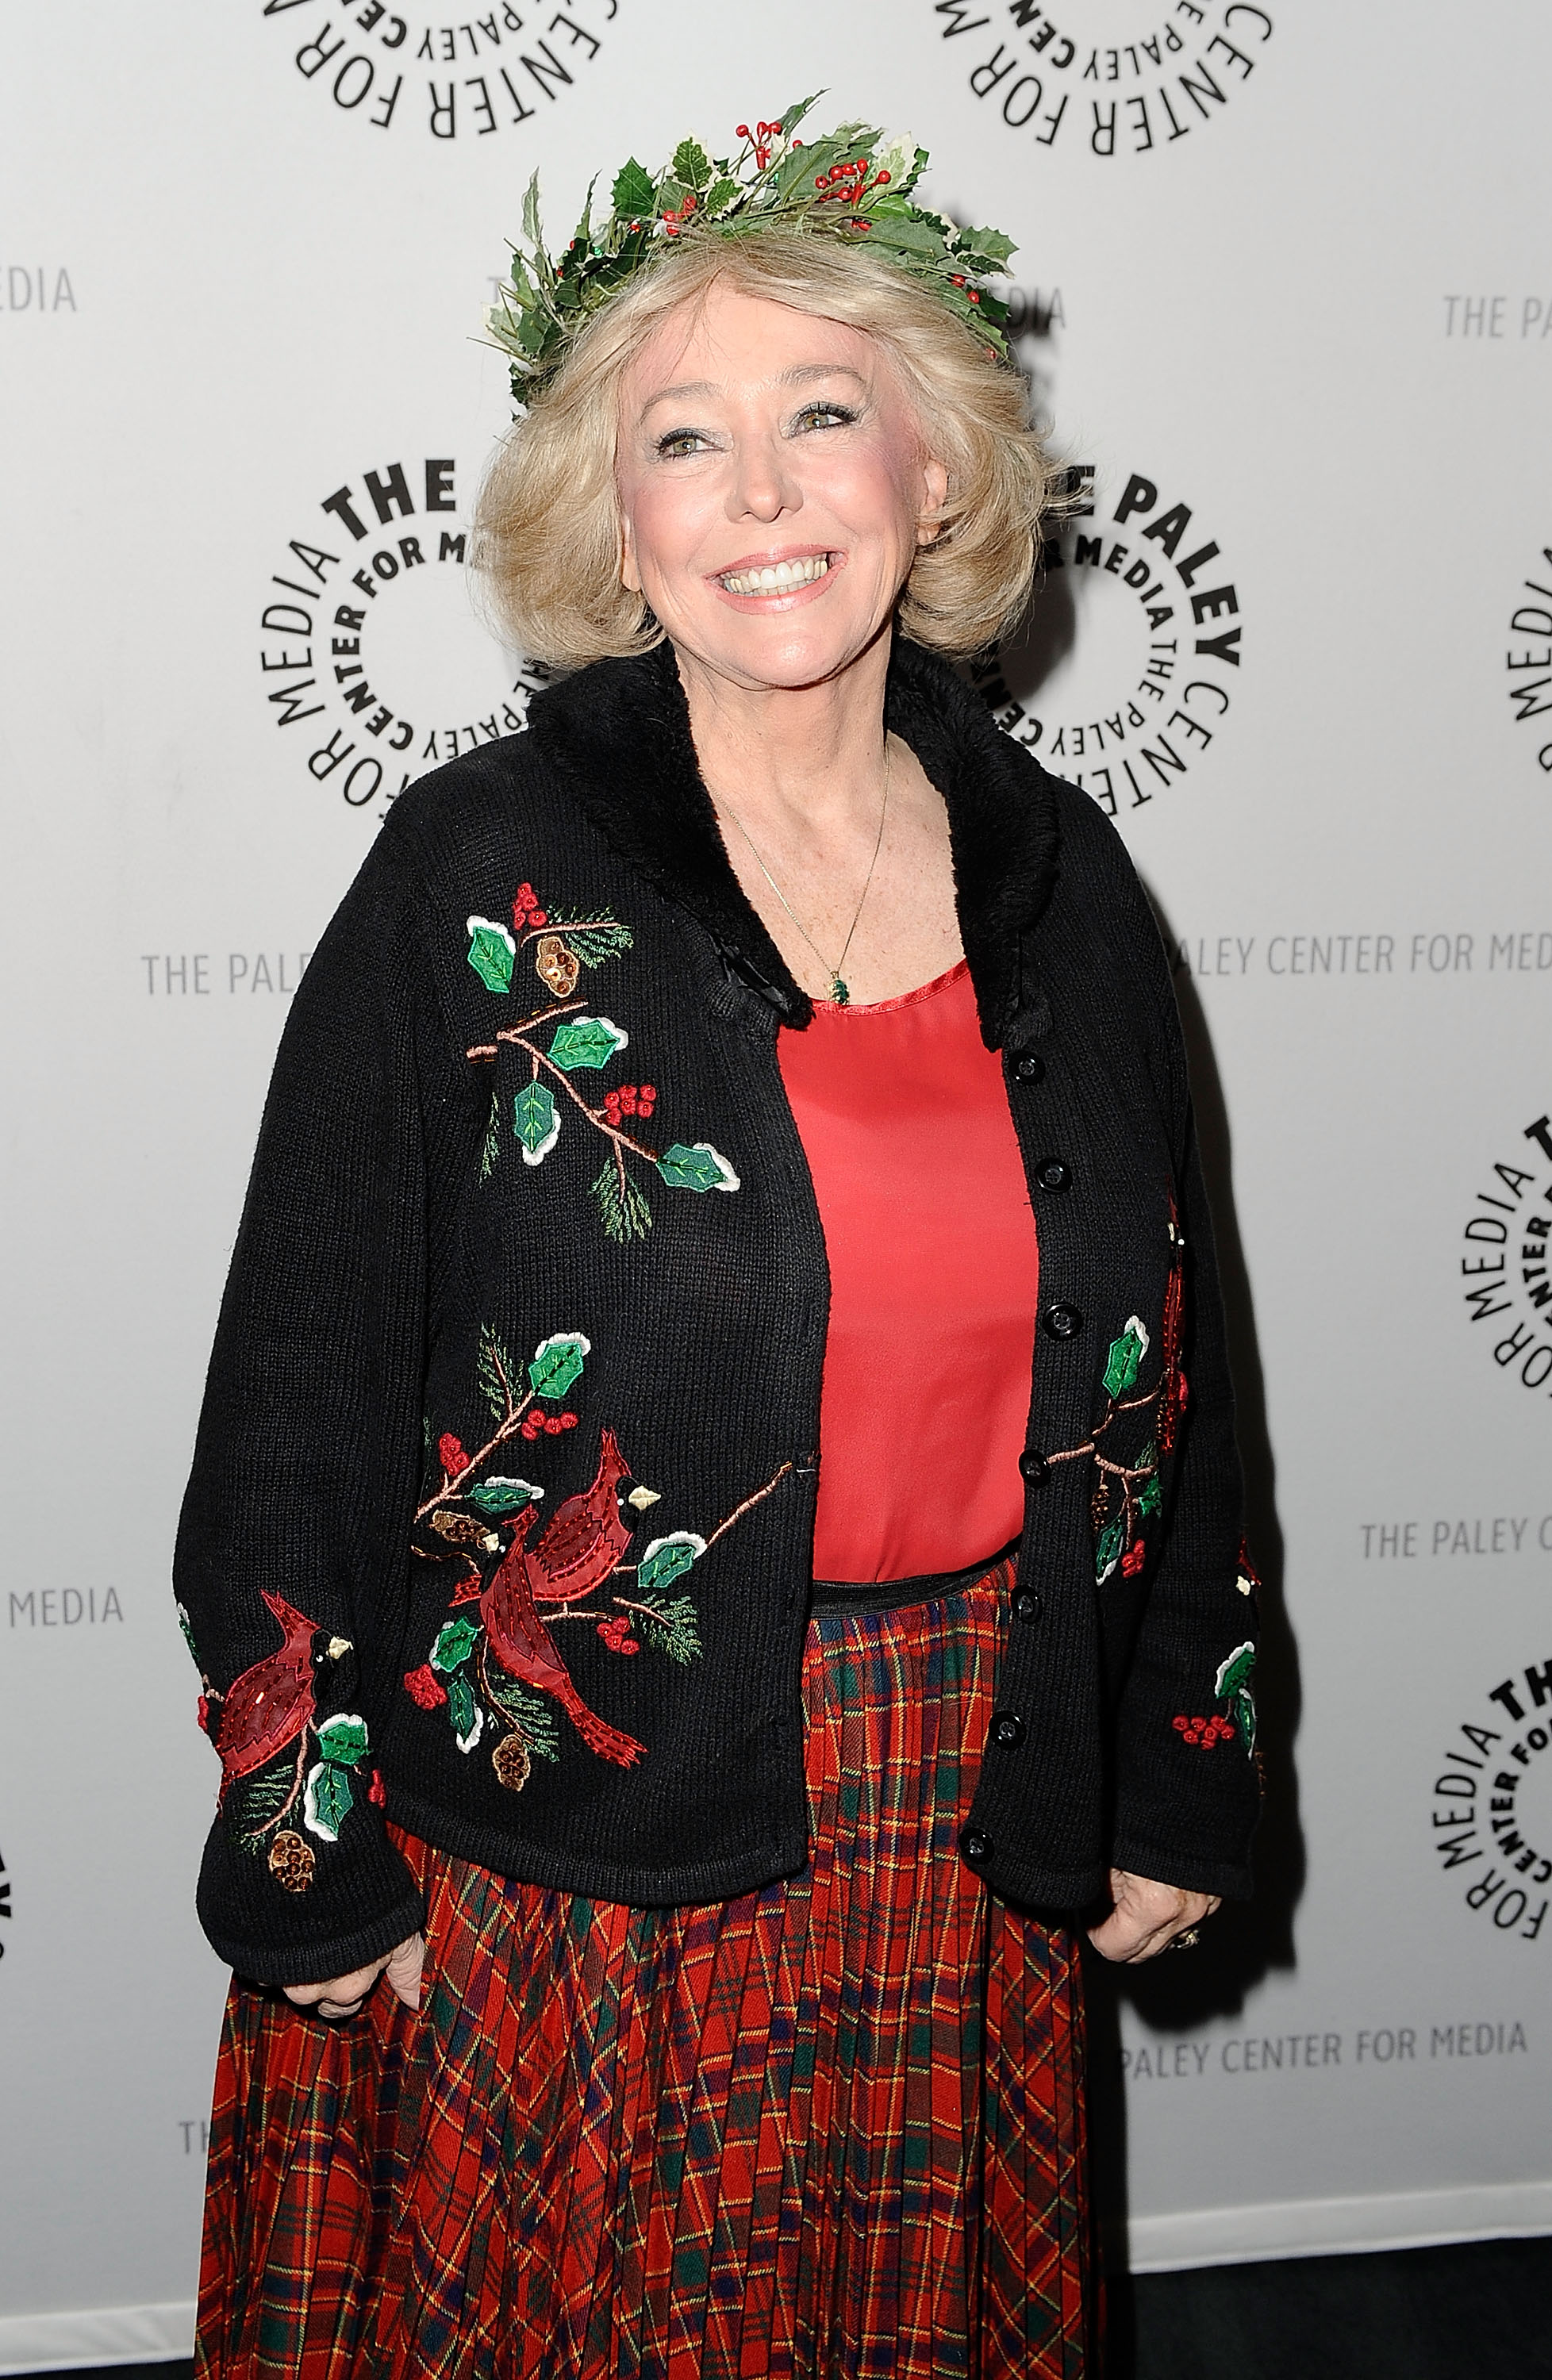 Tina Cole attends the Paley Center for Media Presentation of "Christmas with the King Family" at the Paley Center on December 20, 2009 in Beverly Hills, California | Source: Getty Images